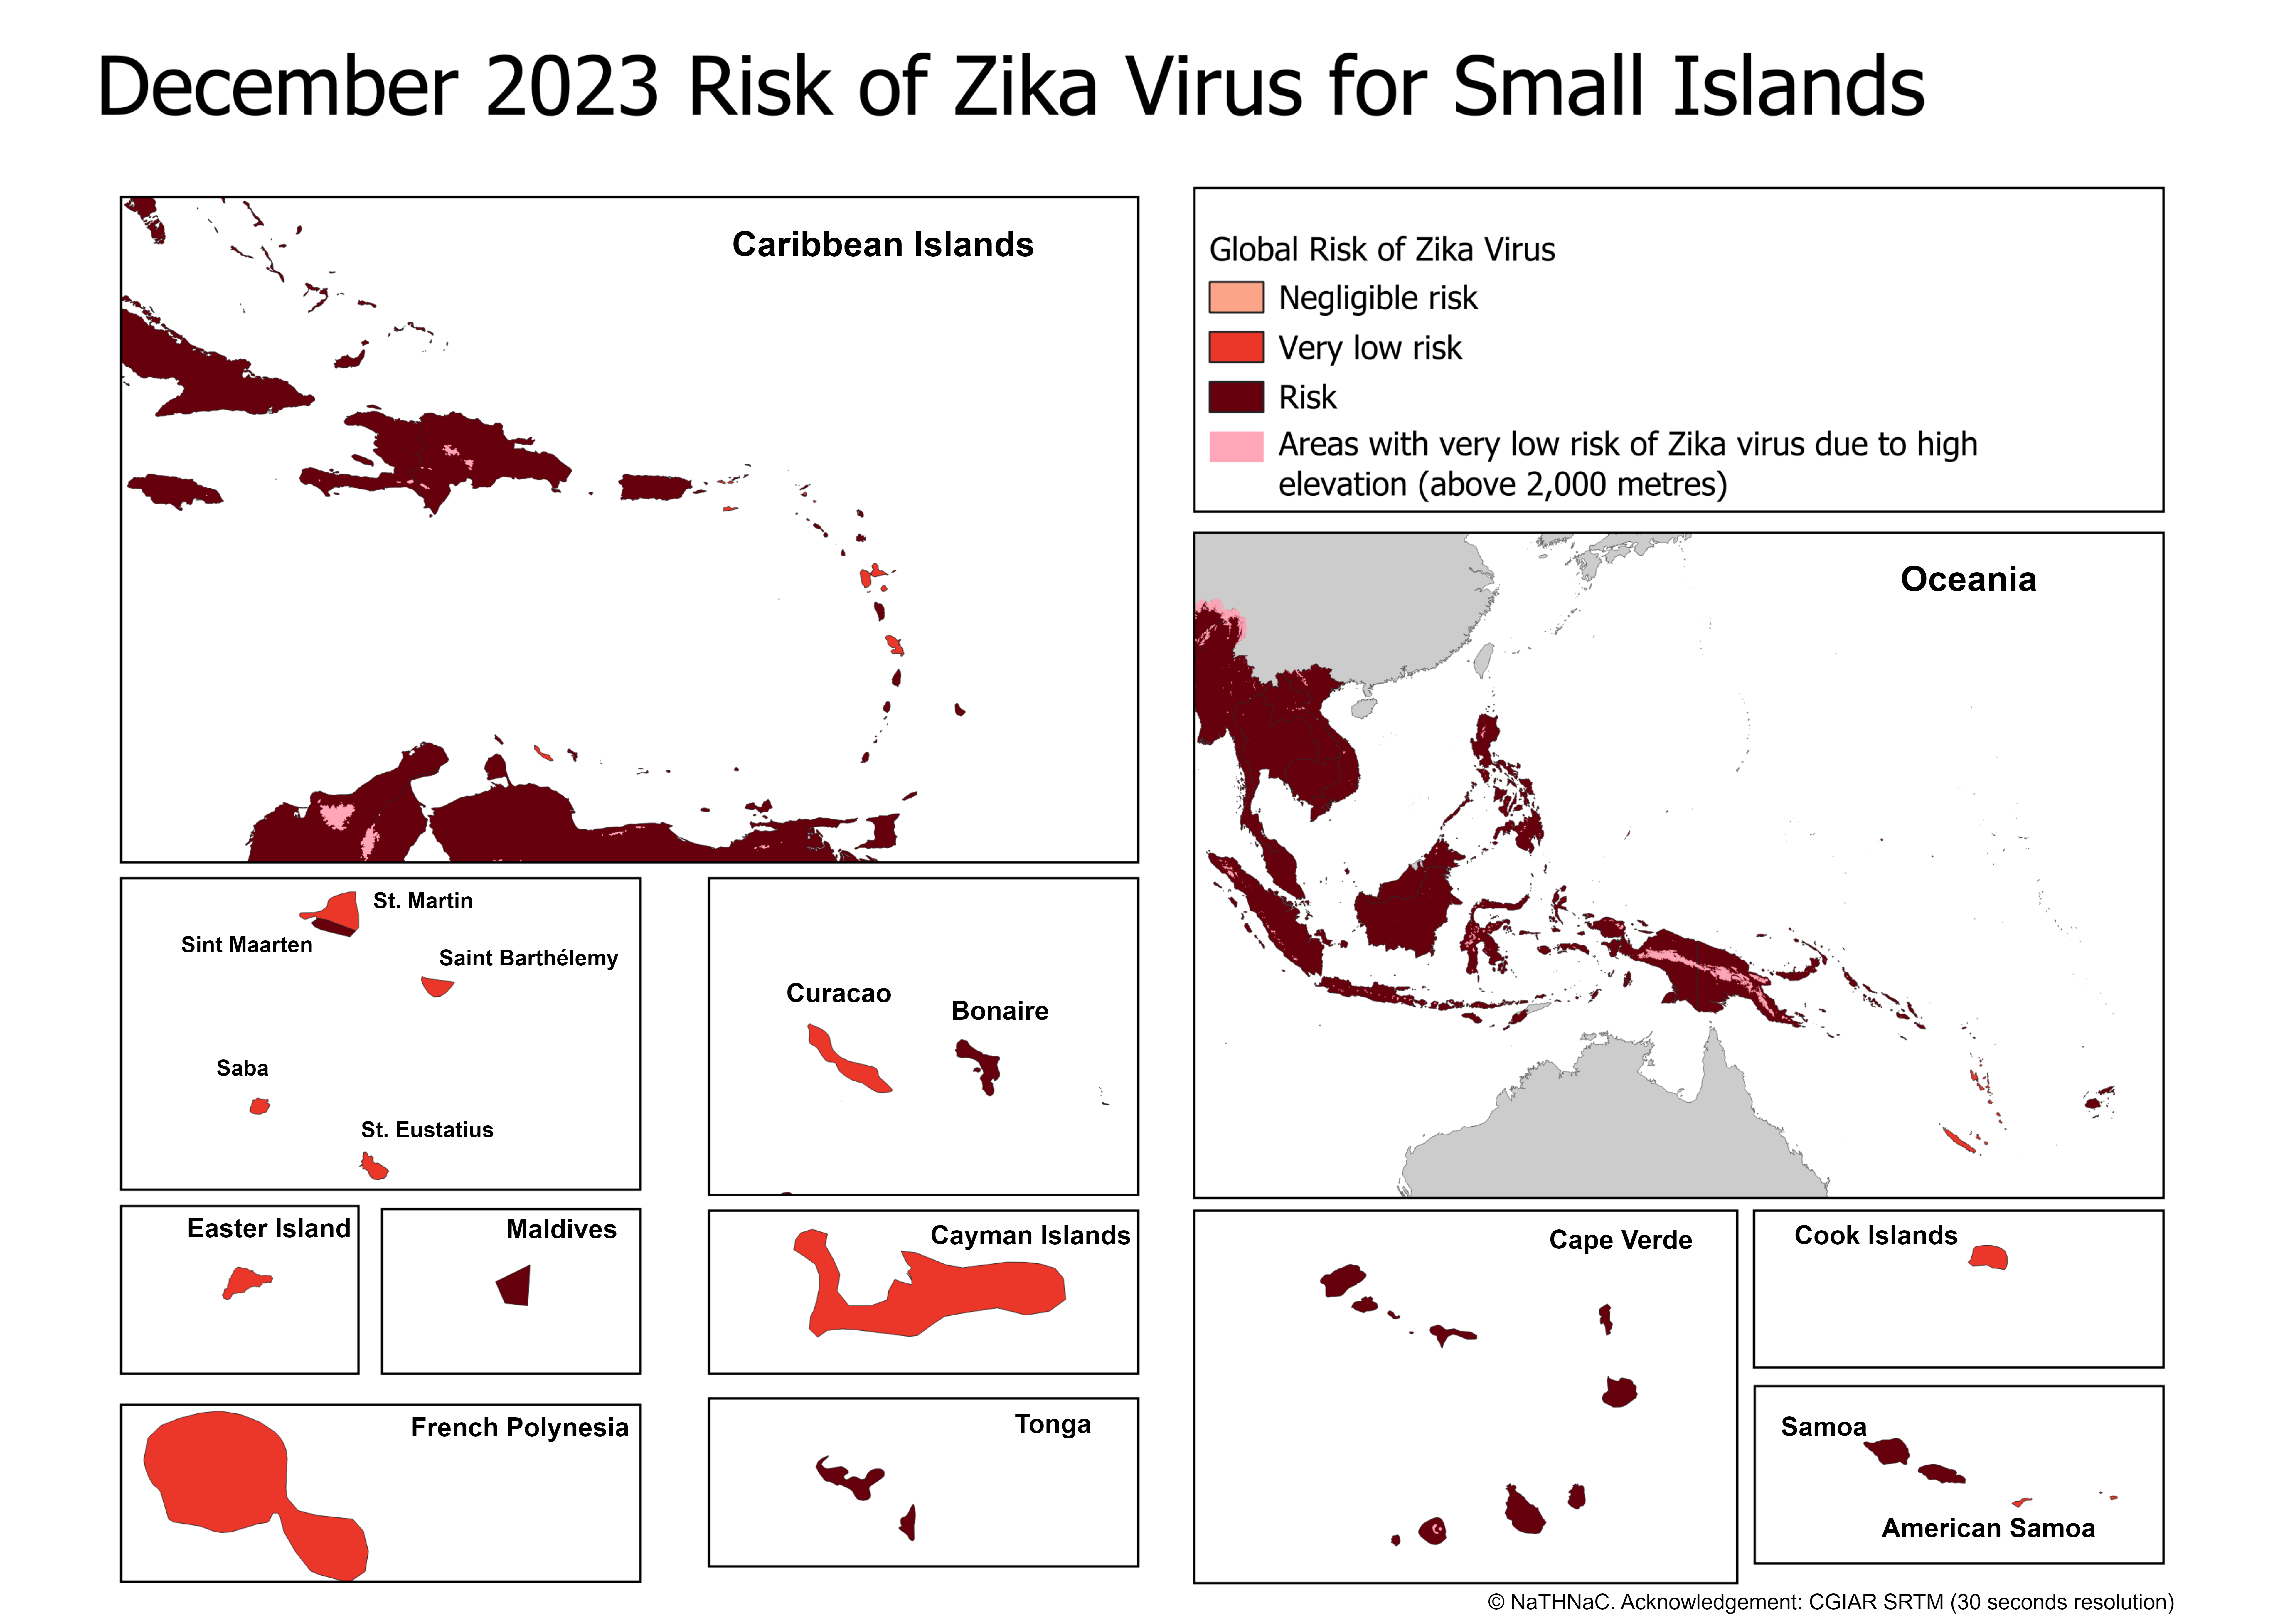 Risk of Zika virus for small islands